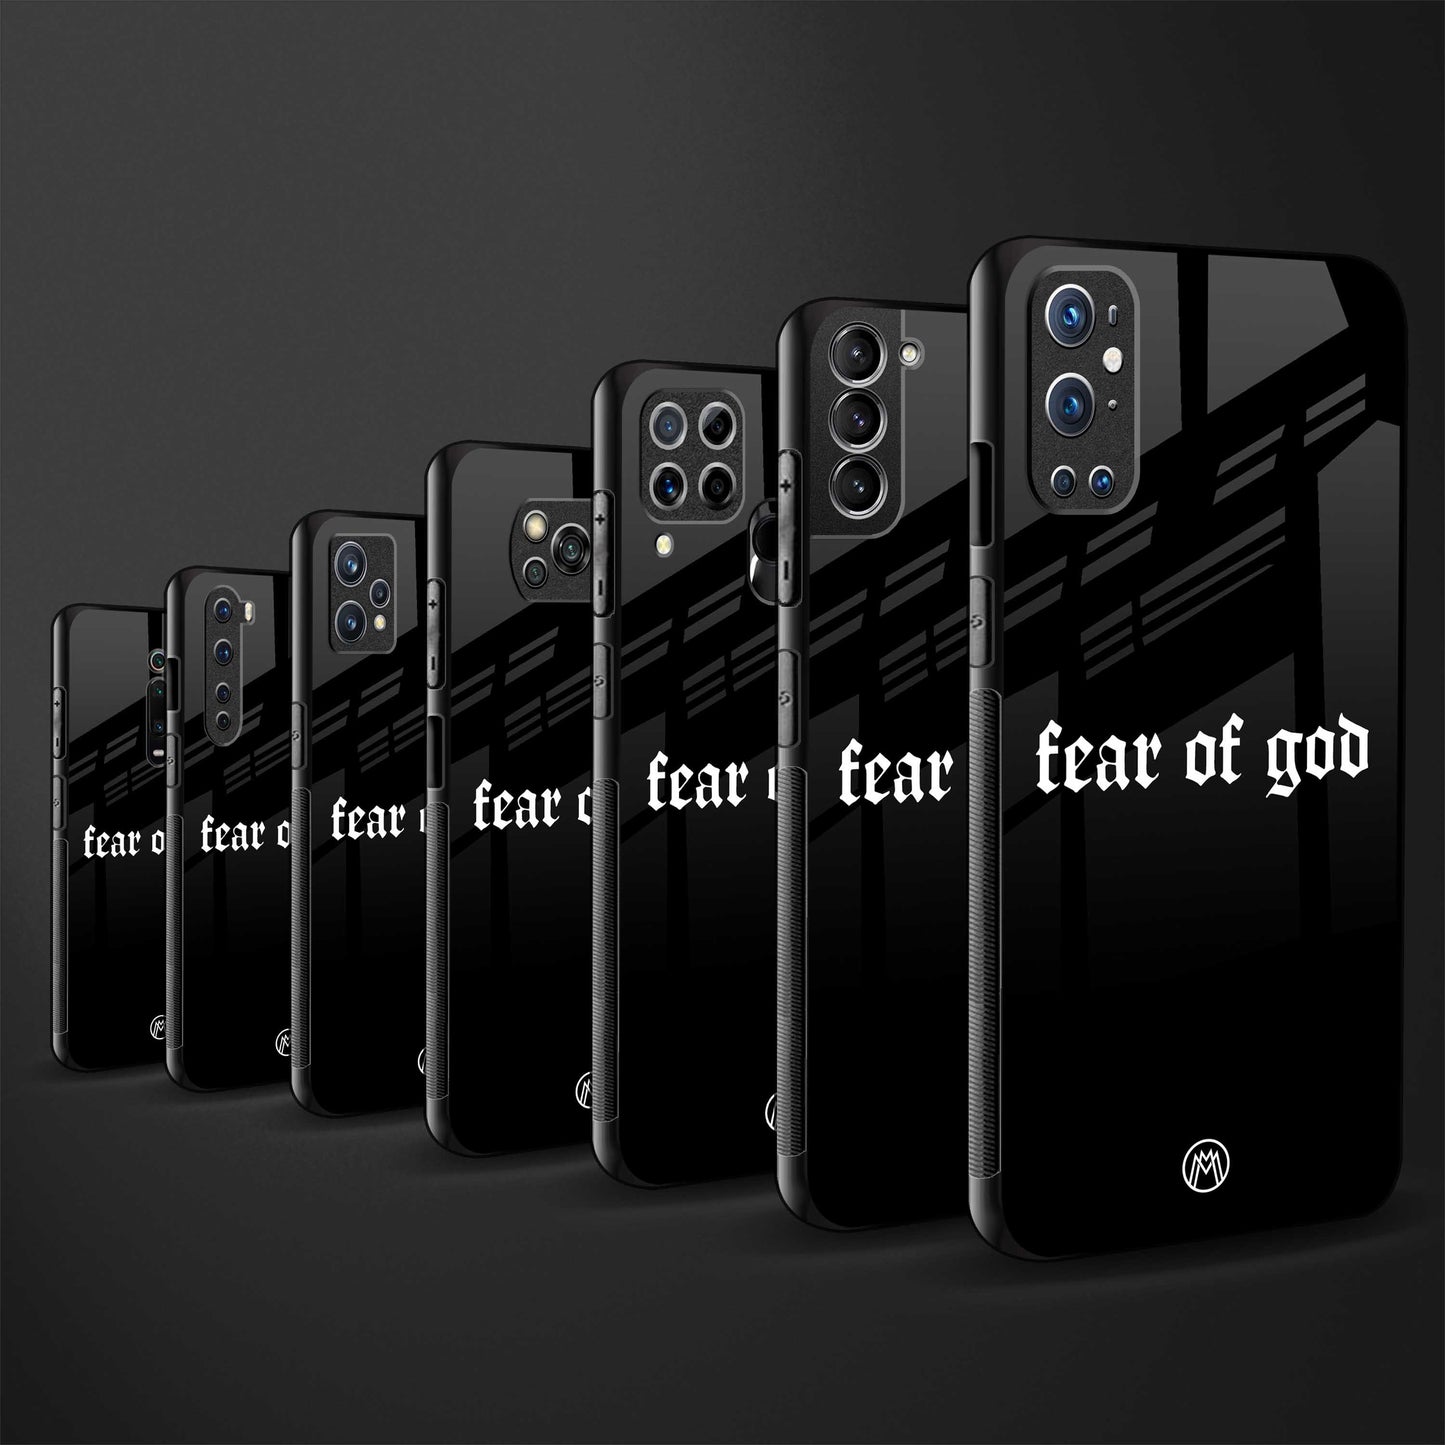 fear of god phone cover for oppo reno 5 pro